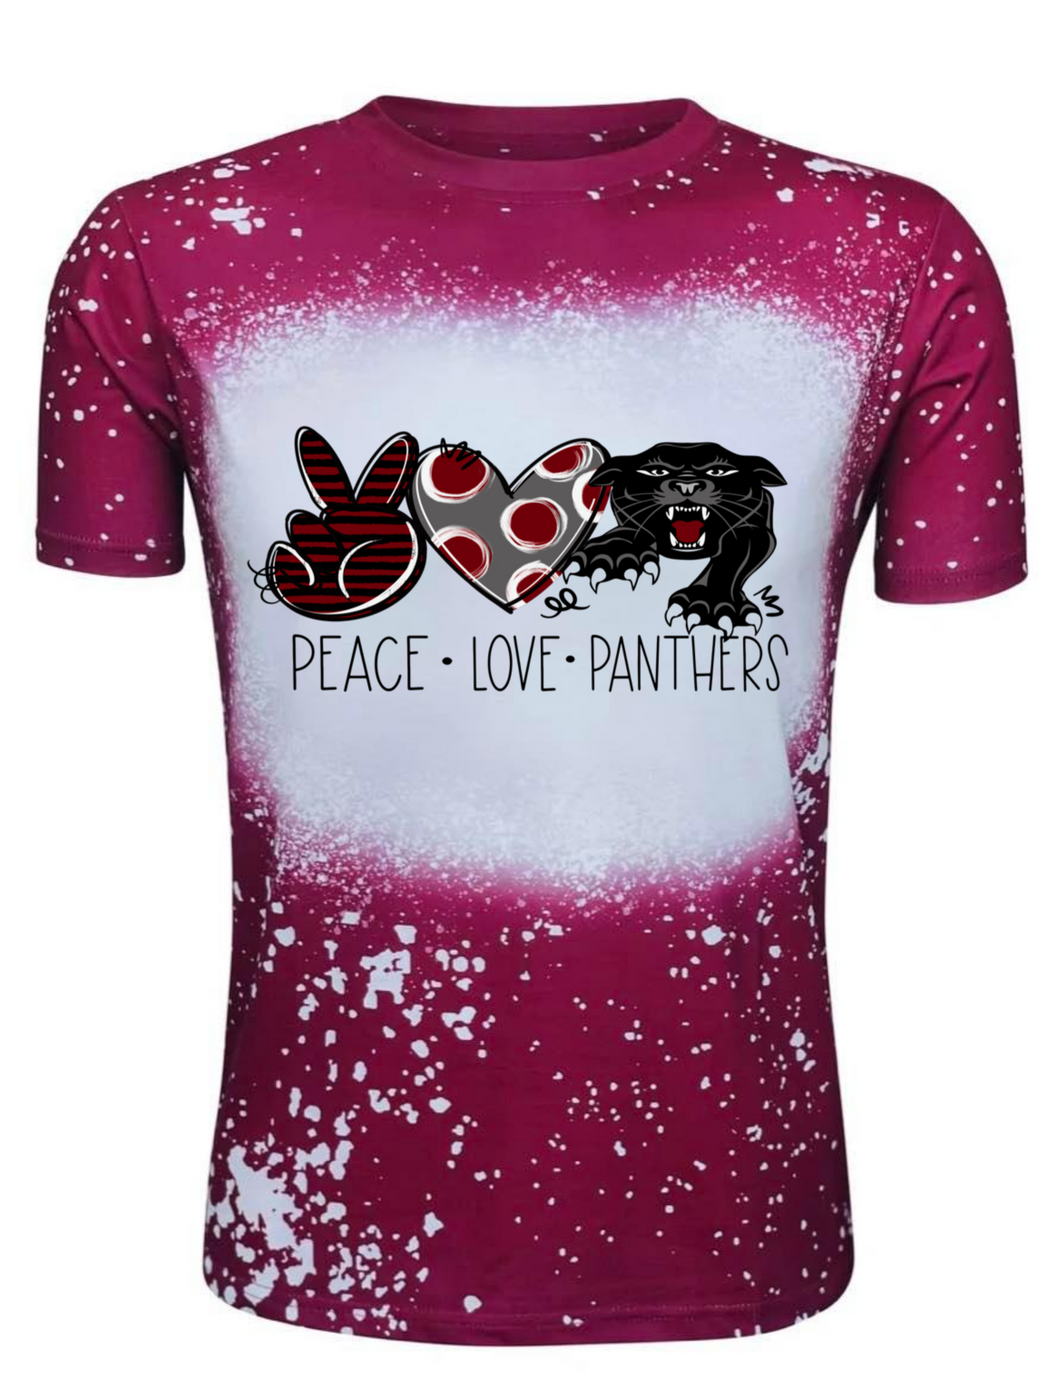 Peace Love Panthers Bleached Tshirt *Limited Edition*